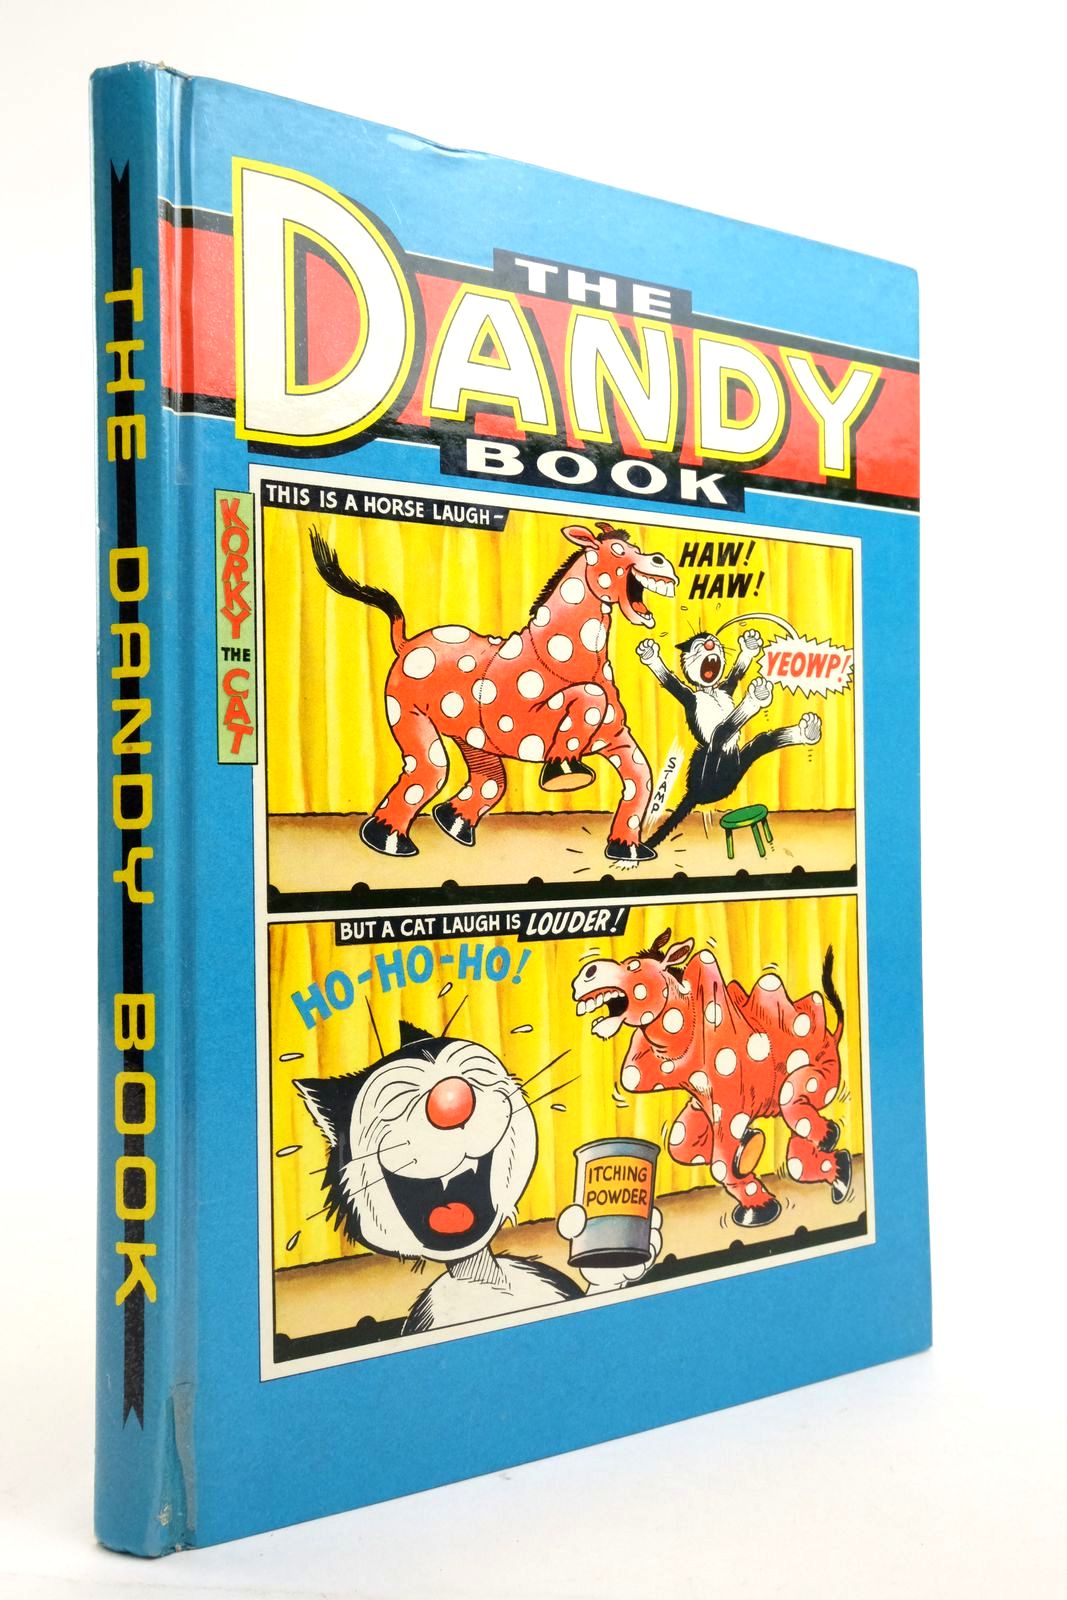 Photo of THE DANDY BOOK 1965 published by D.C. Thomson & Co Ltd. (STOCK CODE: 2137184)  for sale by Stella & Rose's Books